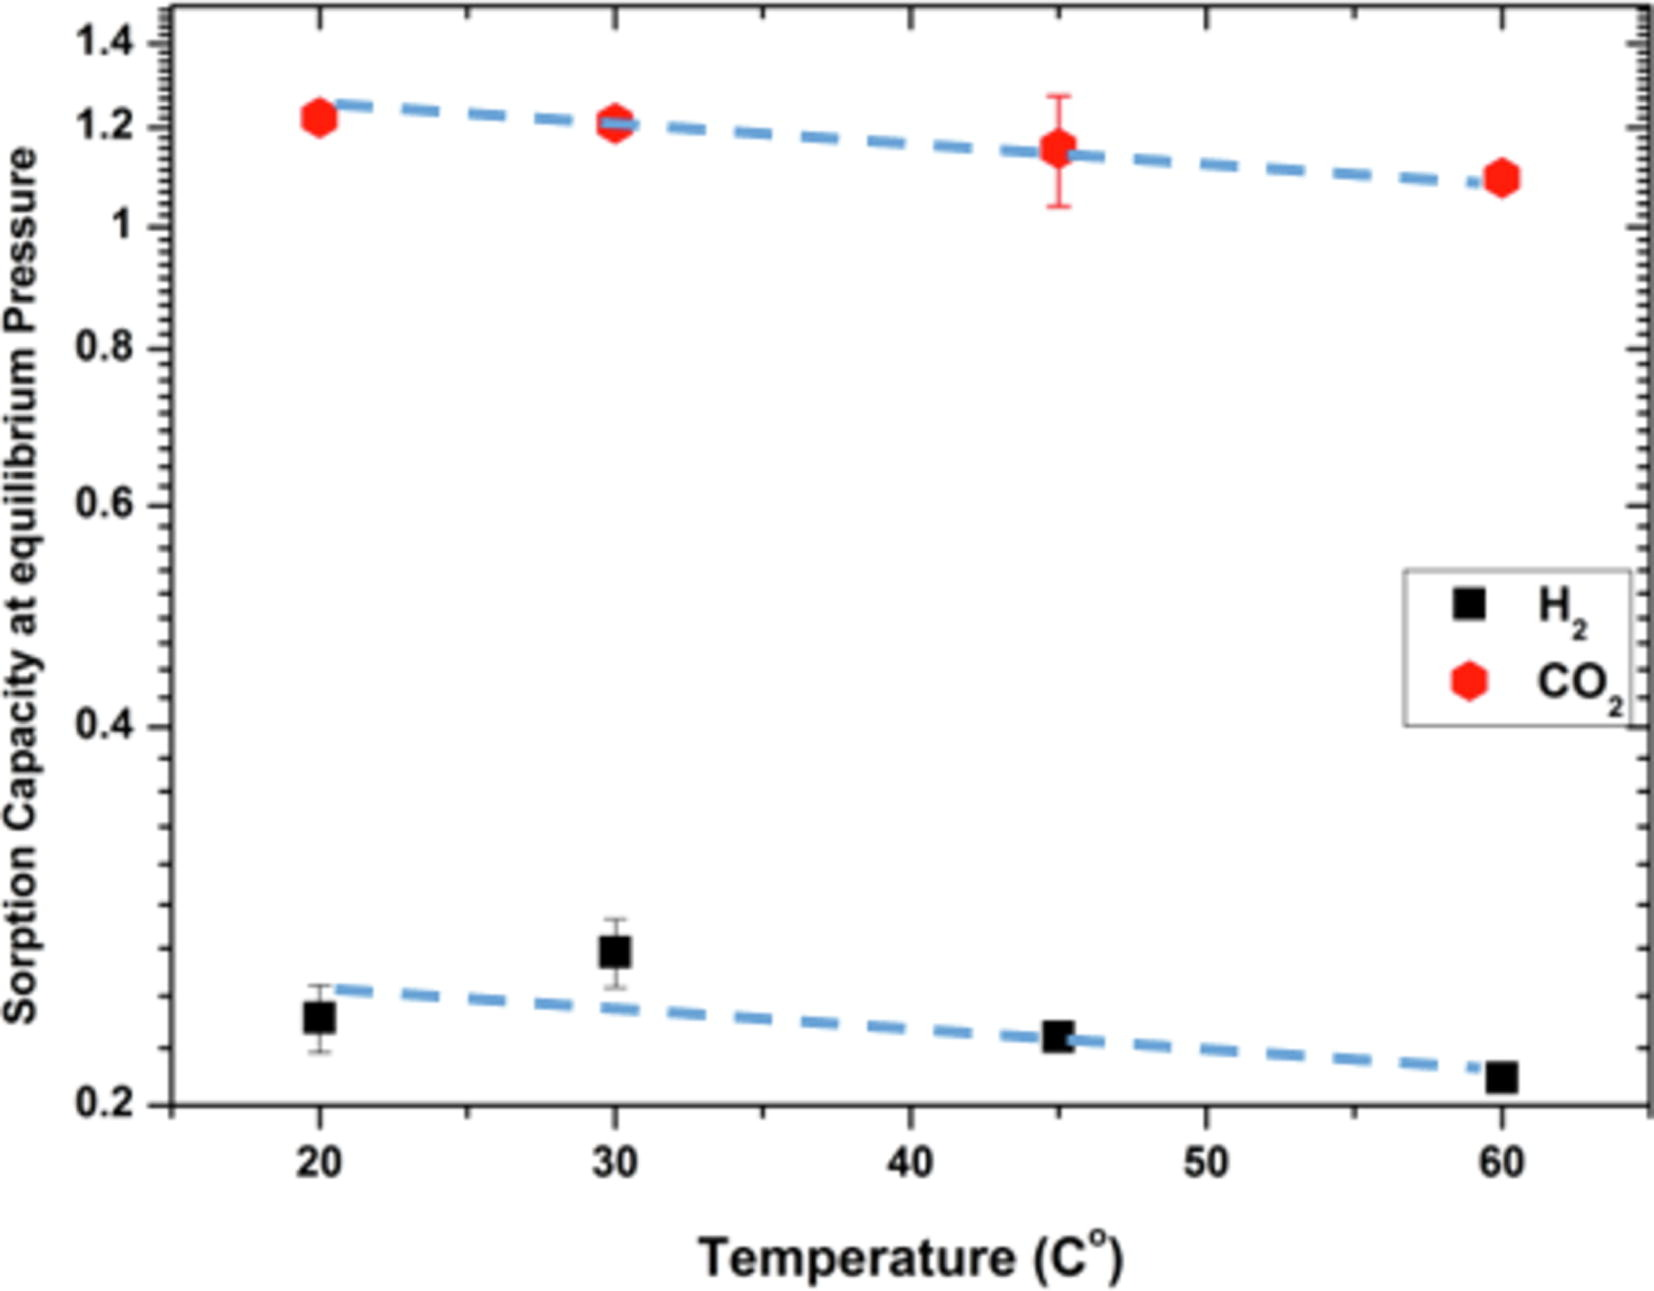 H2 and CO2 adsorption capacities at equilibrium pressure (12.78–13.03 bar) as a function of temperature.